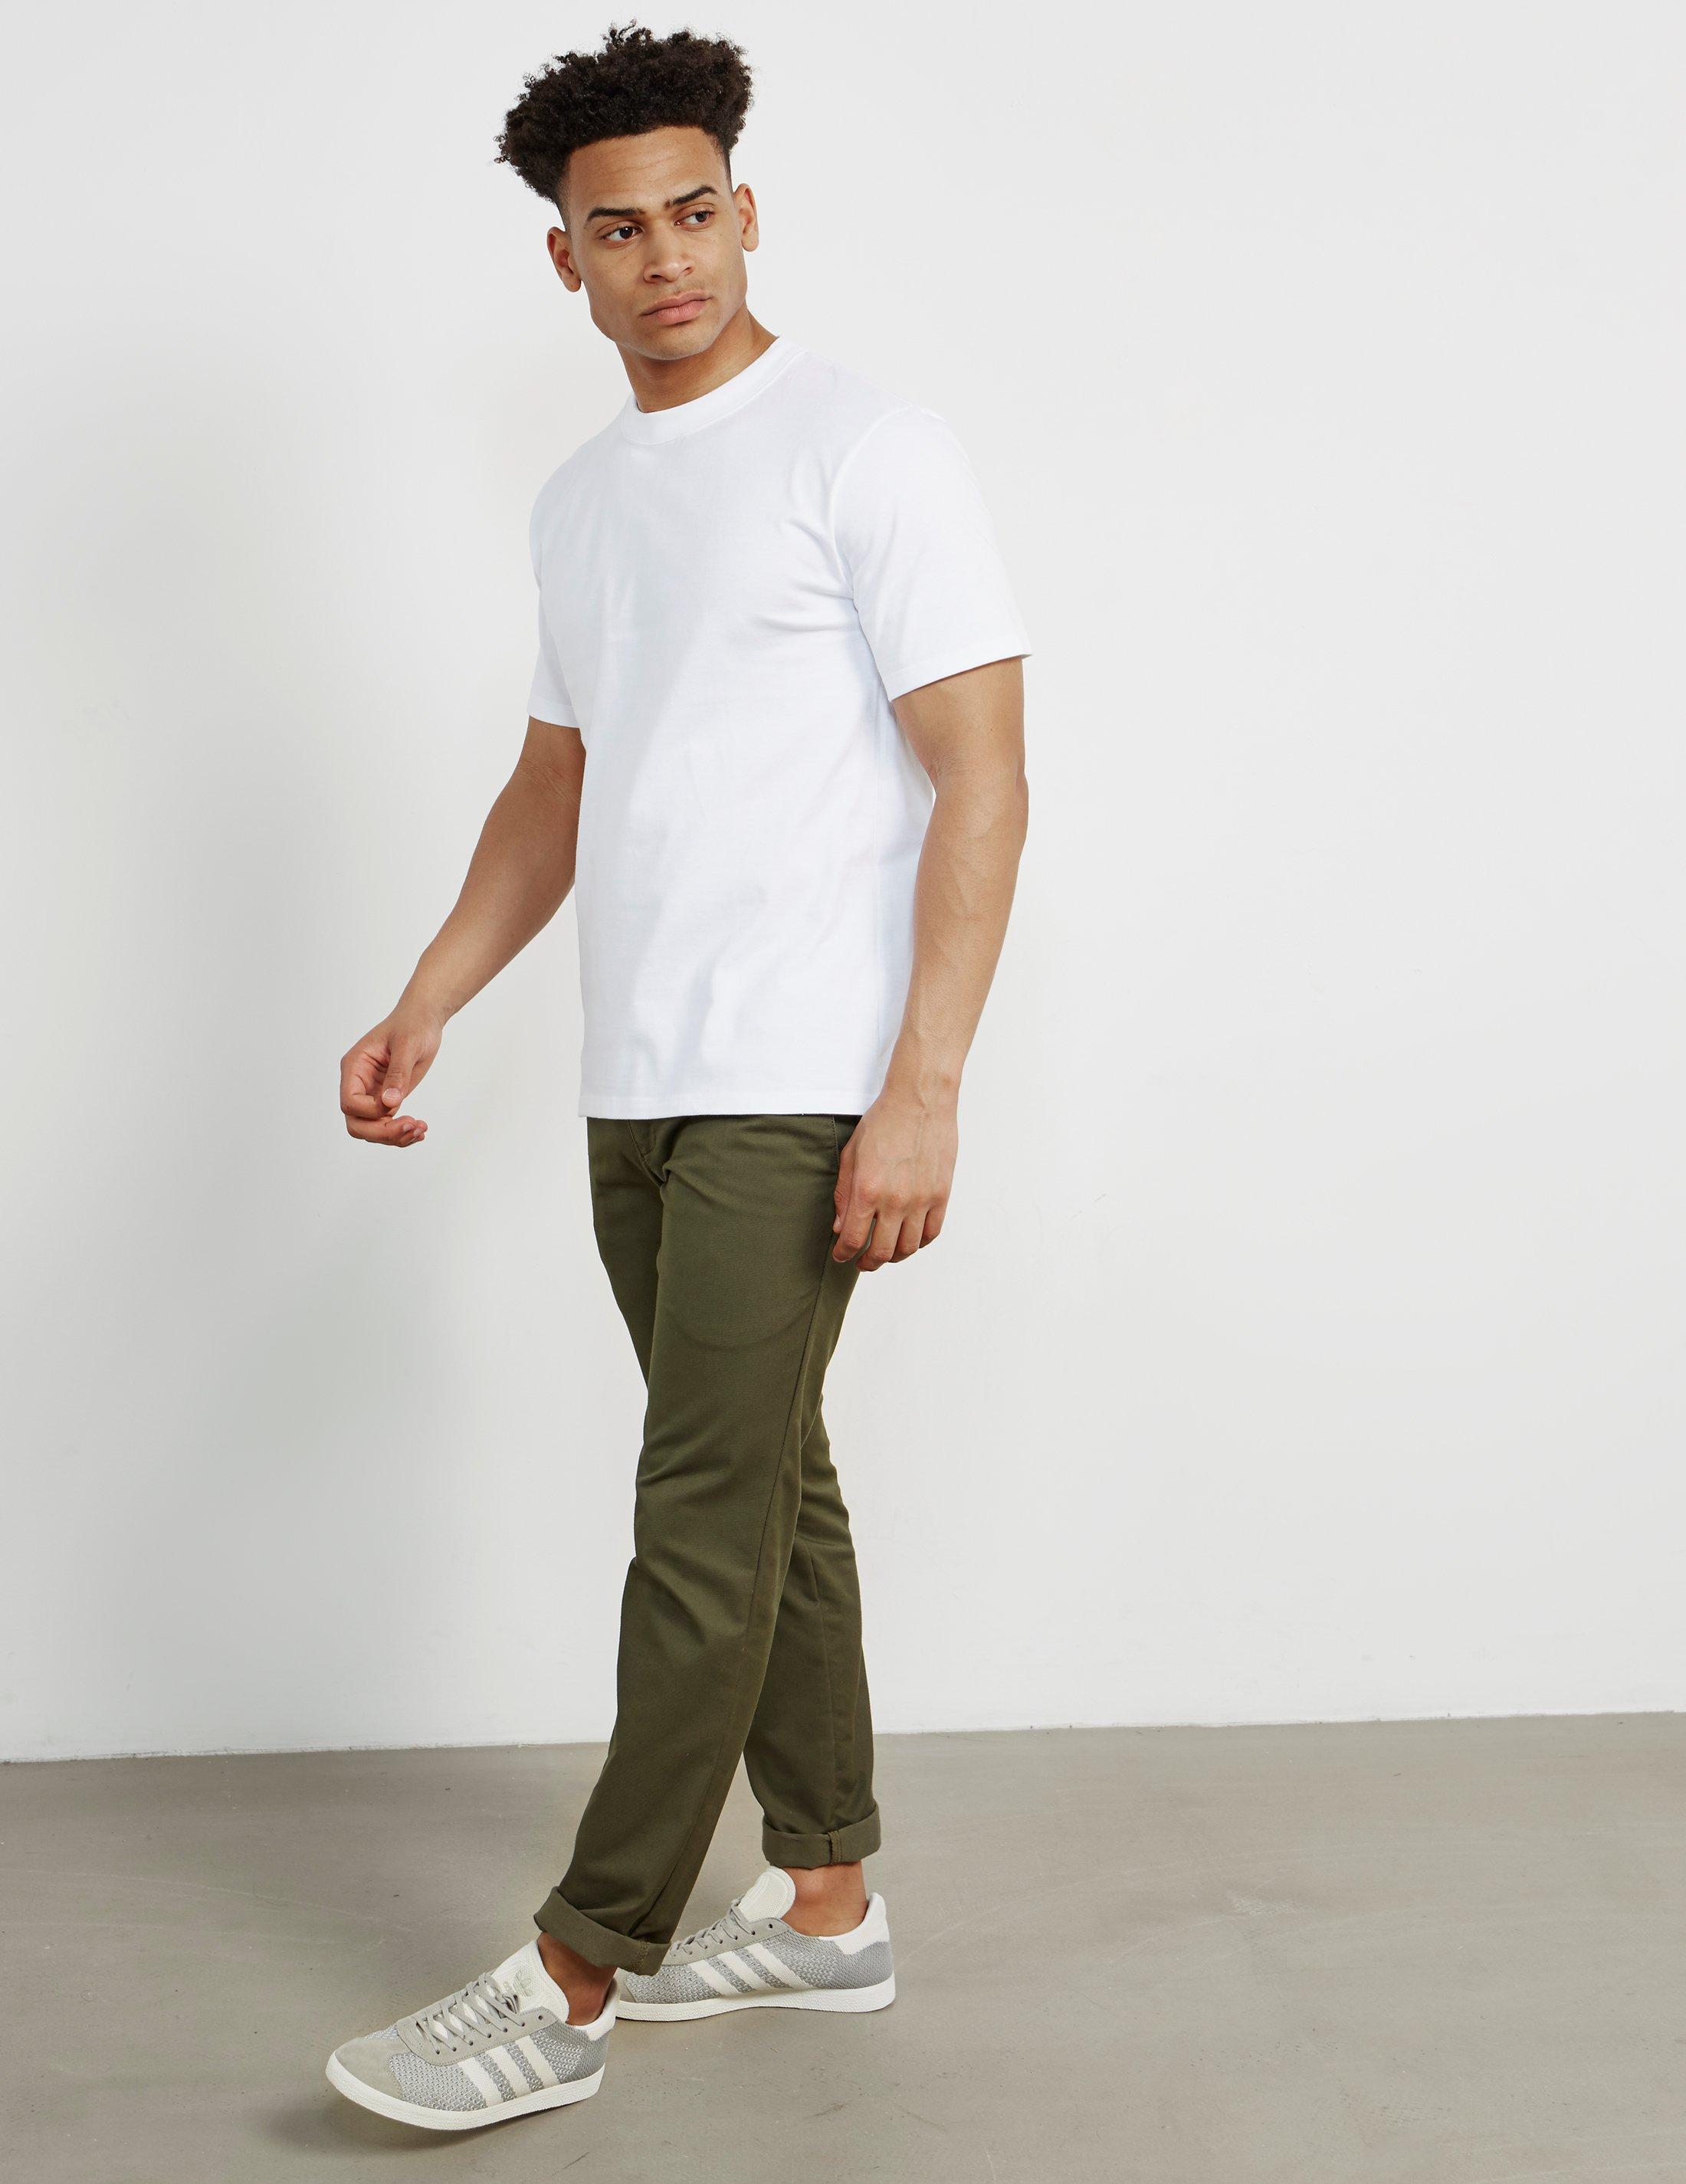 Armor Lux White T Shirt Sale Online, SAVE 30% - pacificlanding.ca